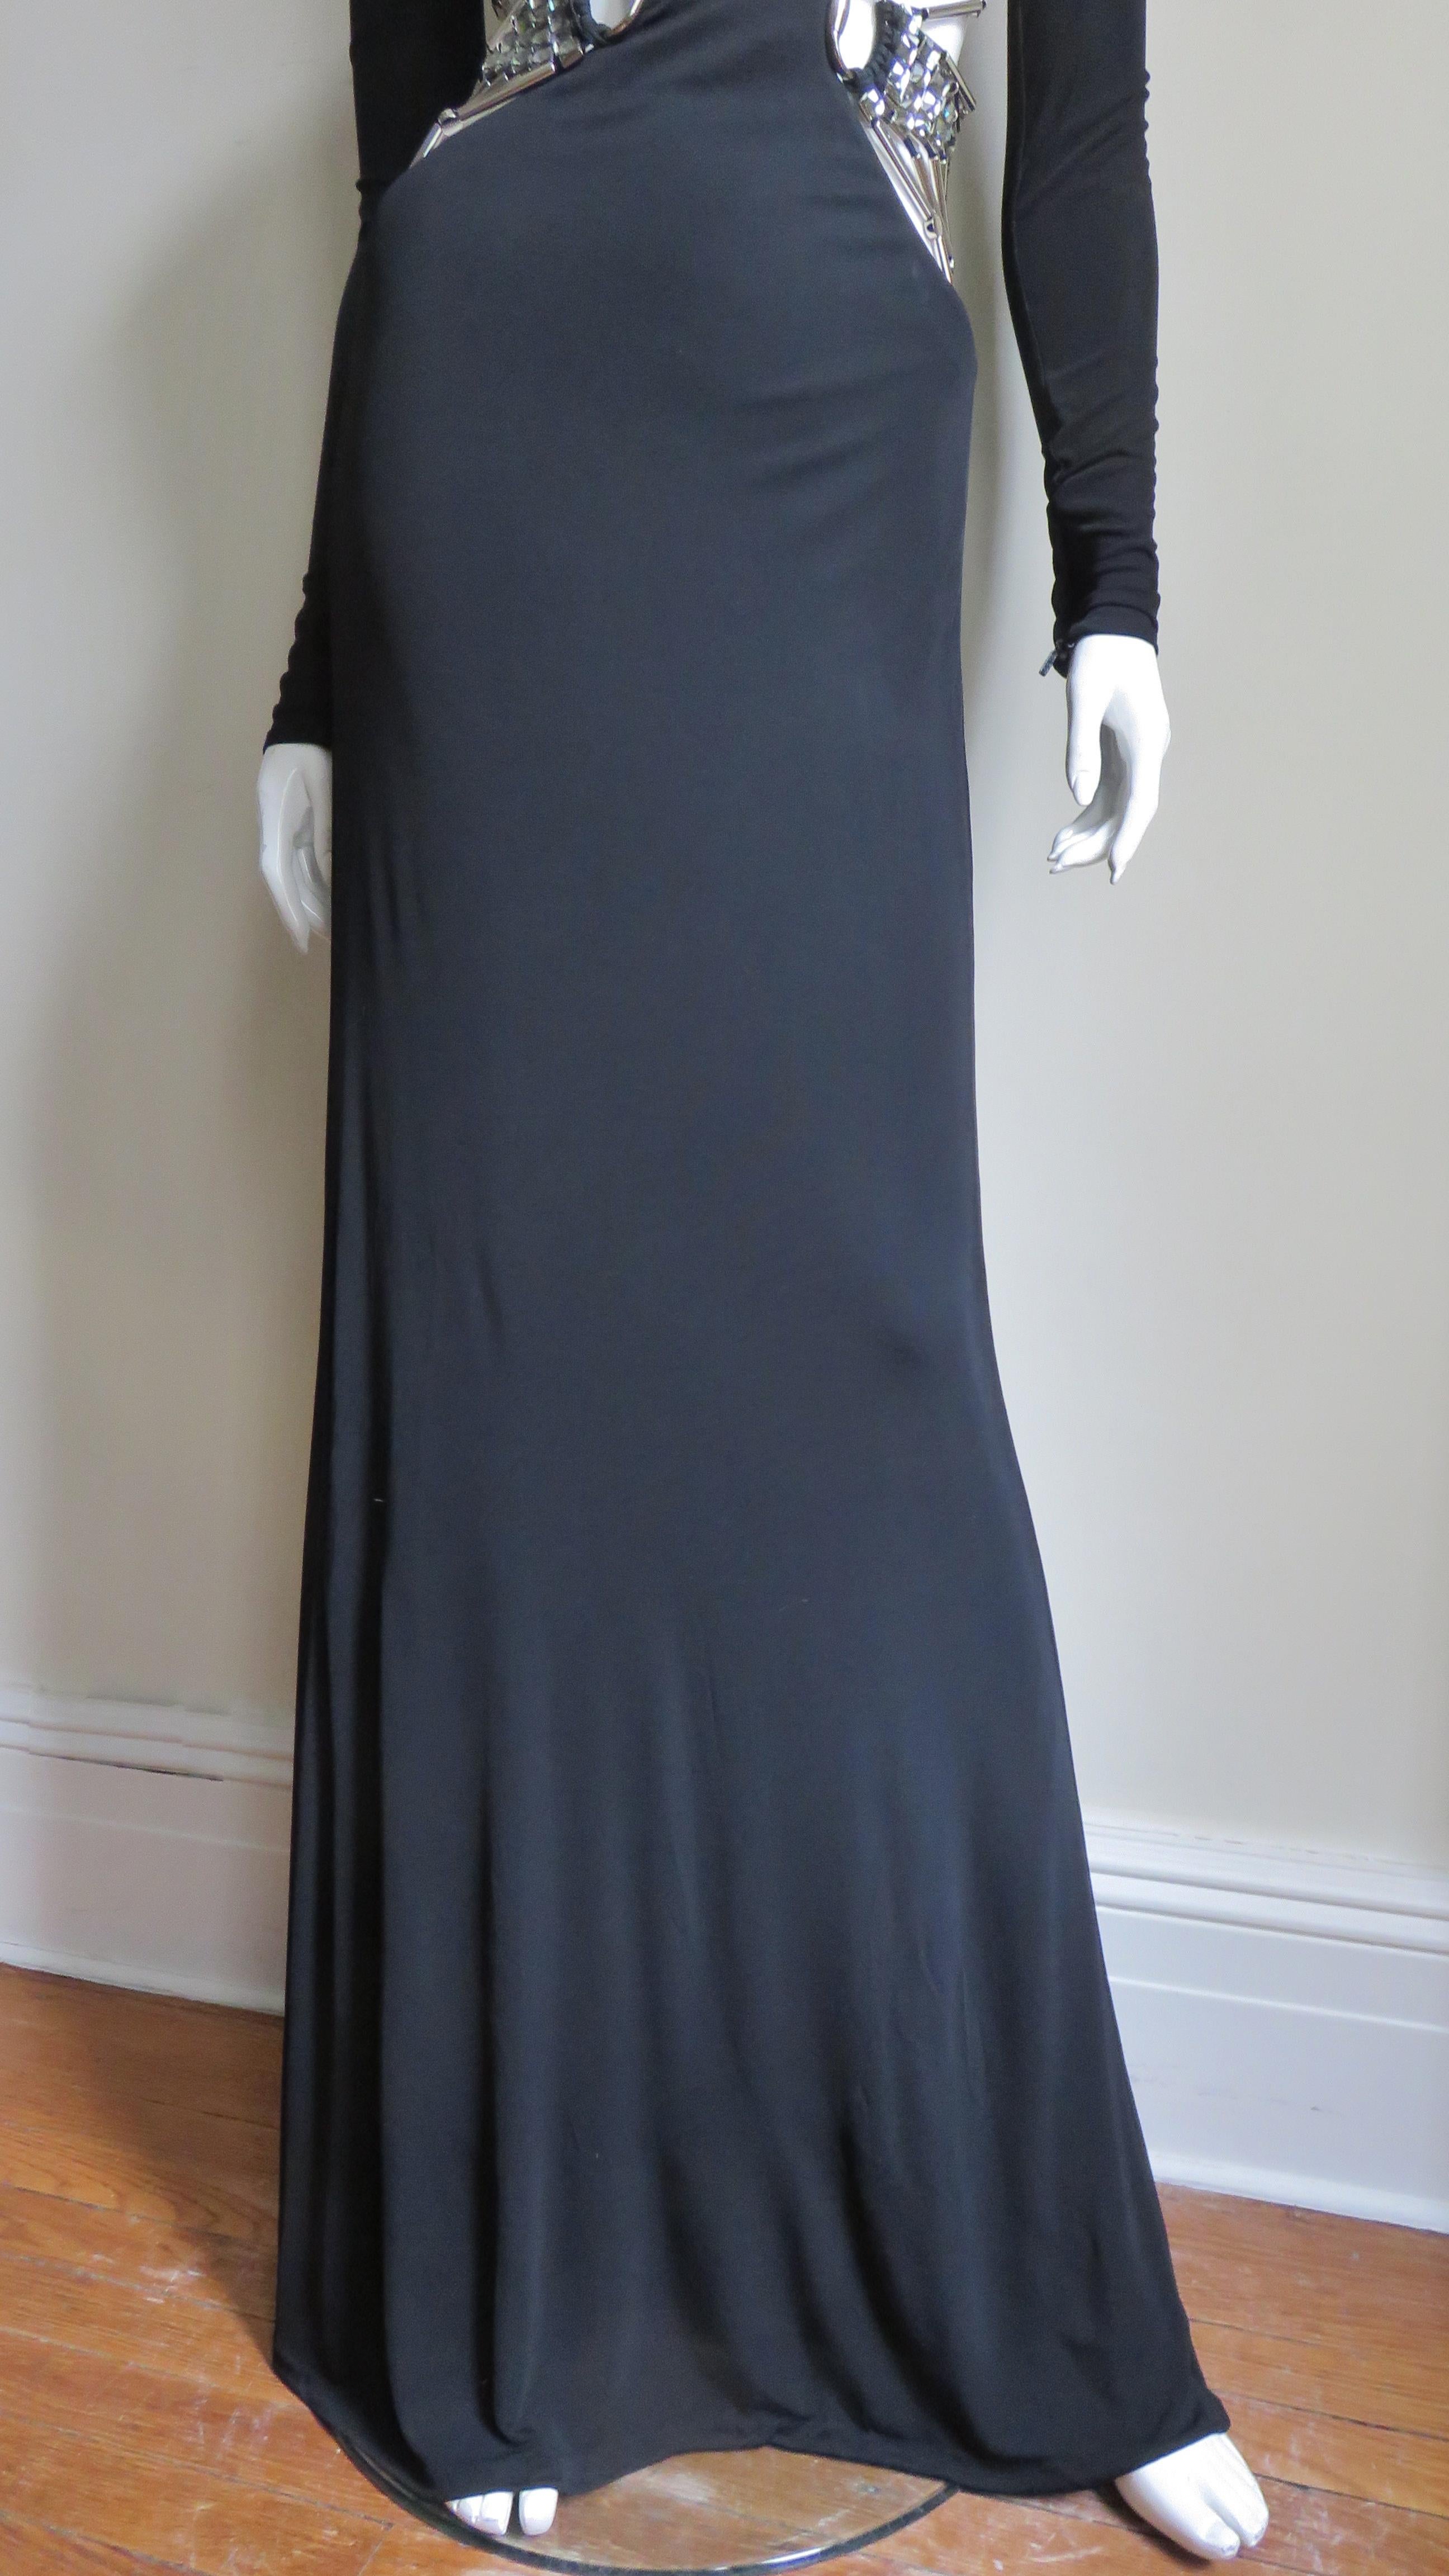 Gucci Silk Gown with Cut out Waist, Swarovski Crystals and Hardware SS 2010 In Excellent Condition For Sale In Water Mill, NY